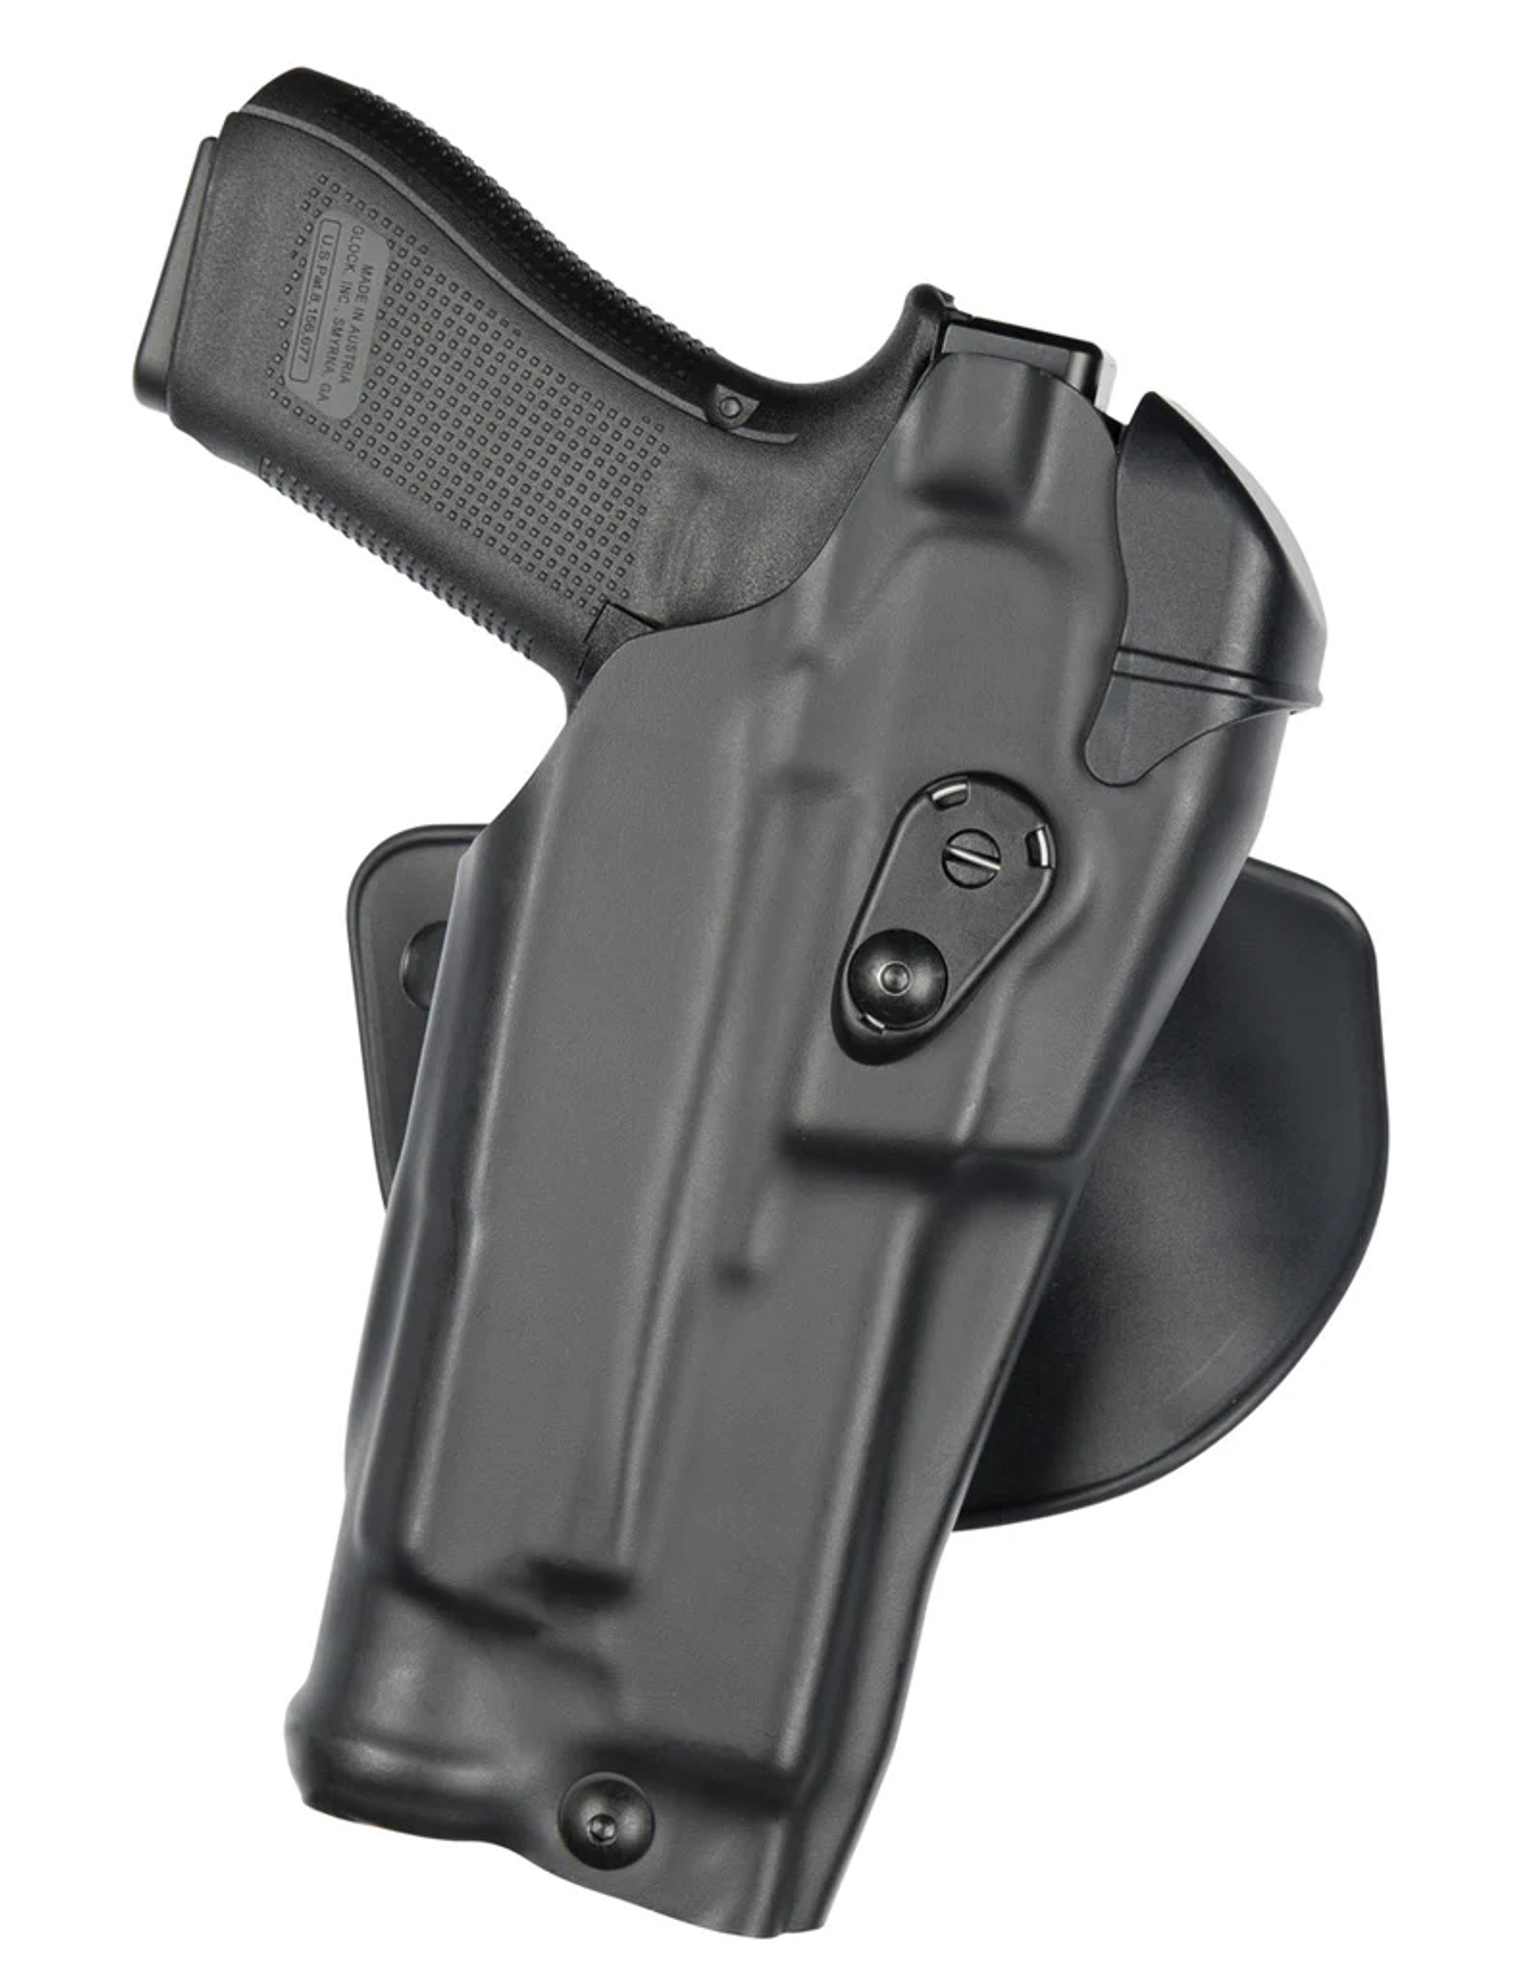 Model 6378rds Als Concealment Paddle Holster For Glock 19 Mos W/ Light - KR6378RDS-2832-131